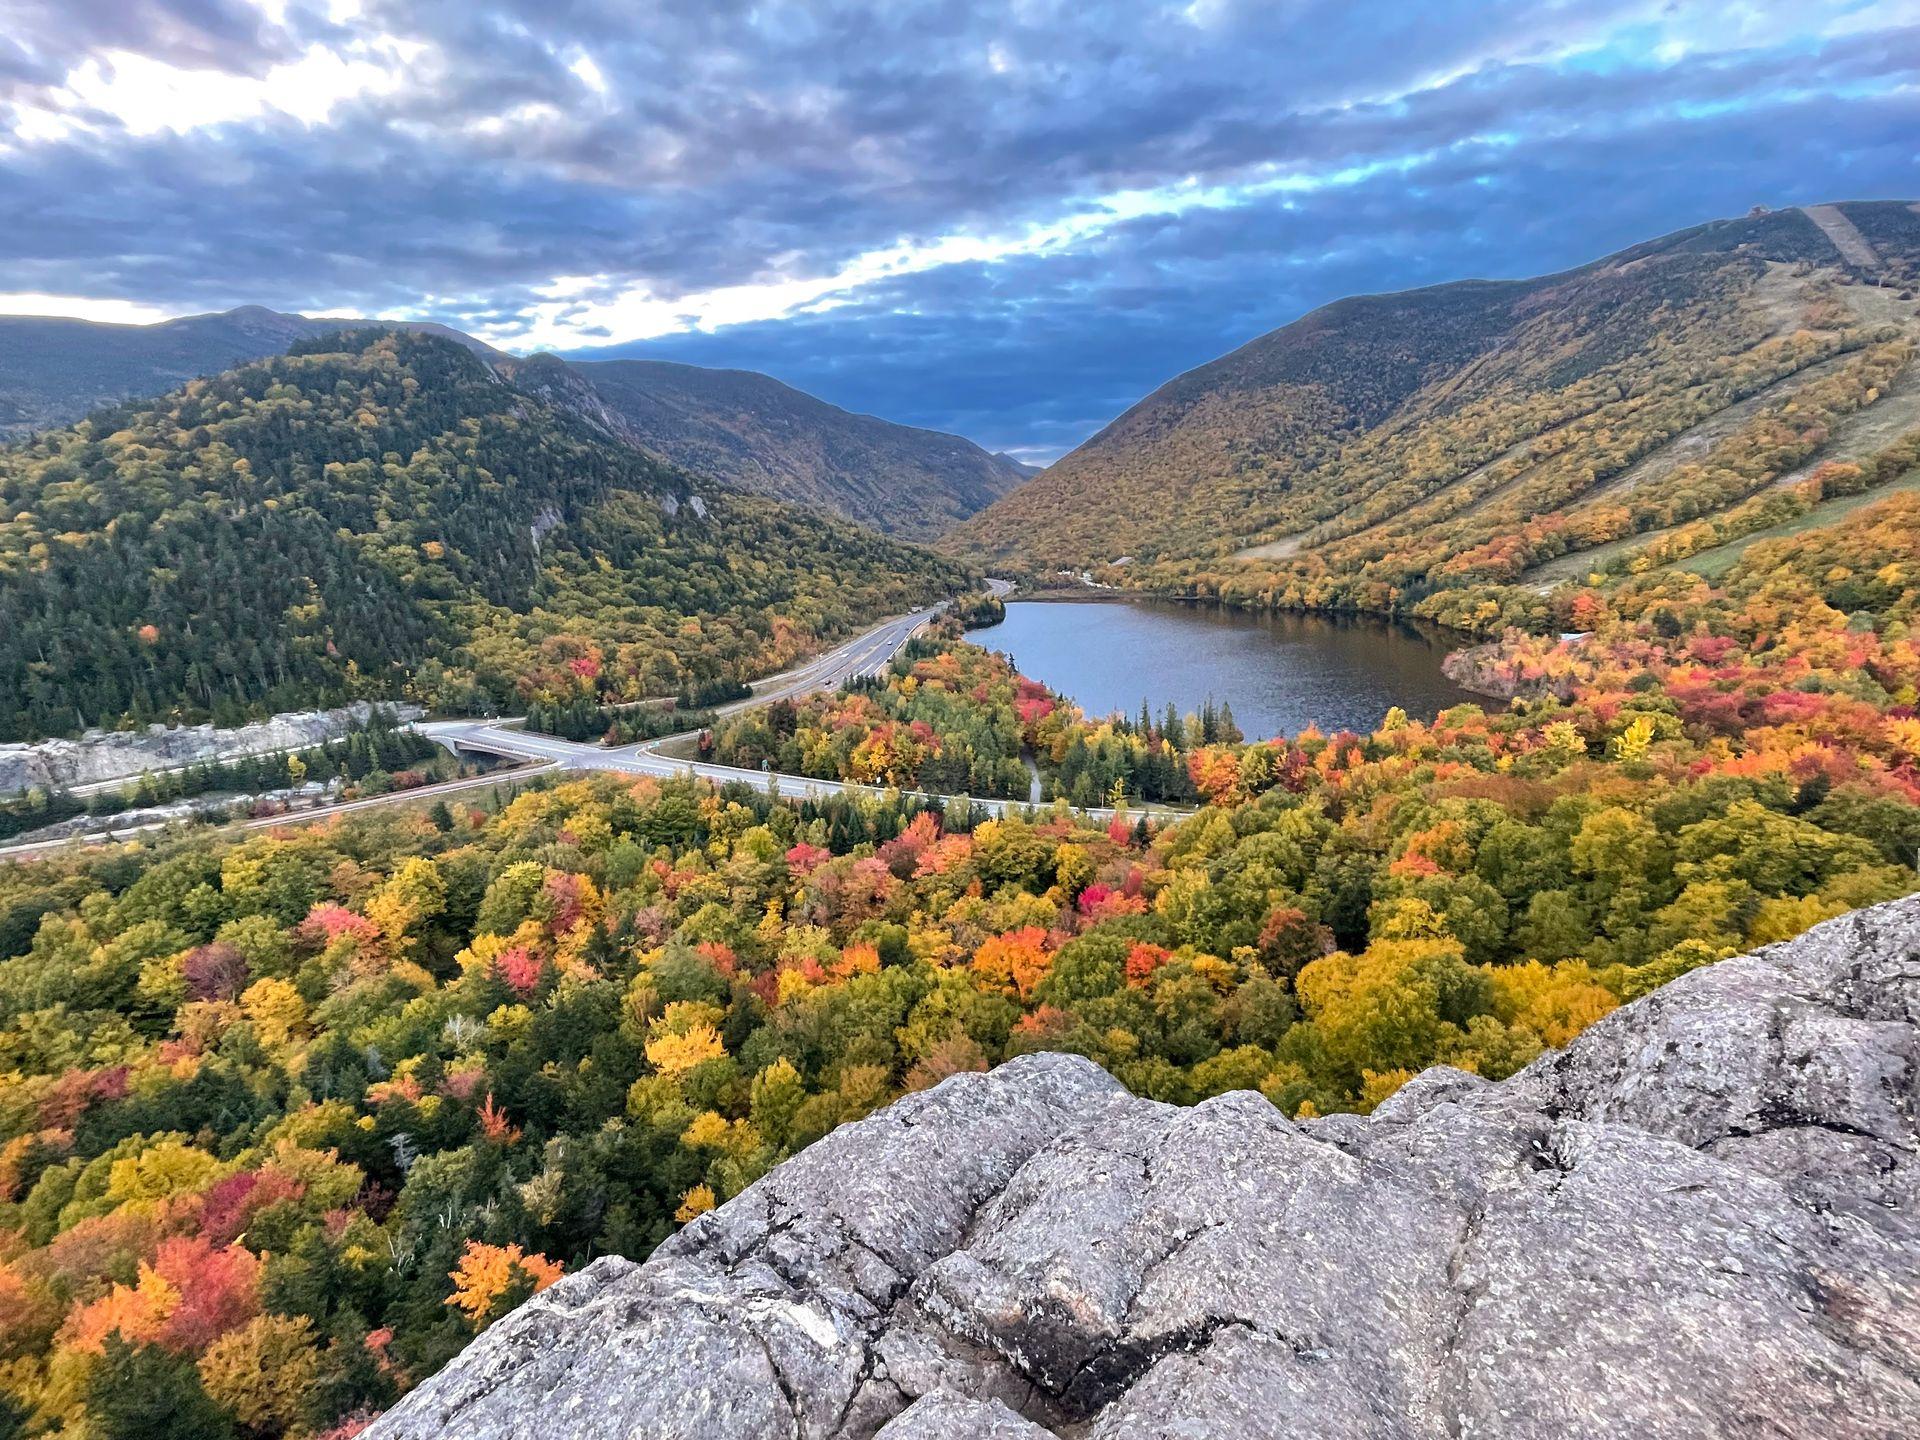 The view of Artist's Bluff. There is a lake surrounded by mountains and colorful fall foliage.